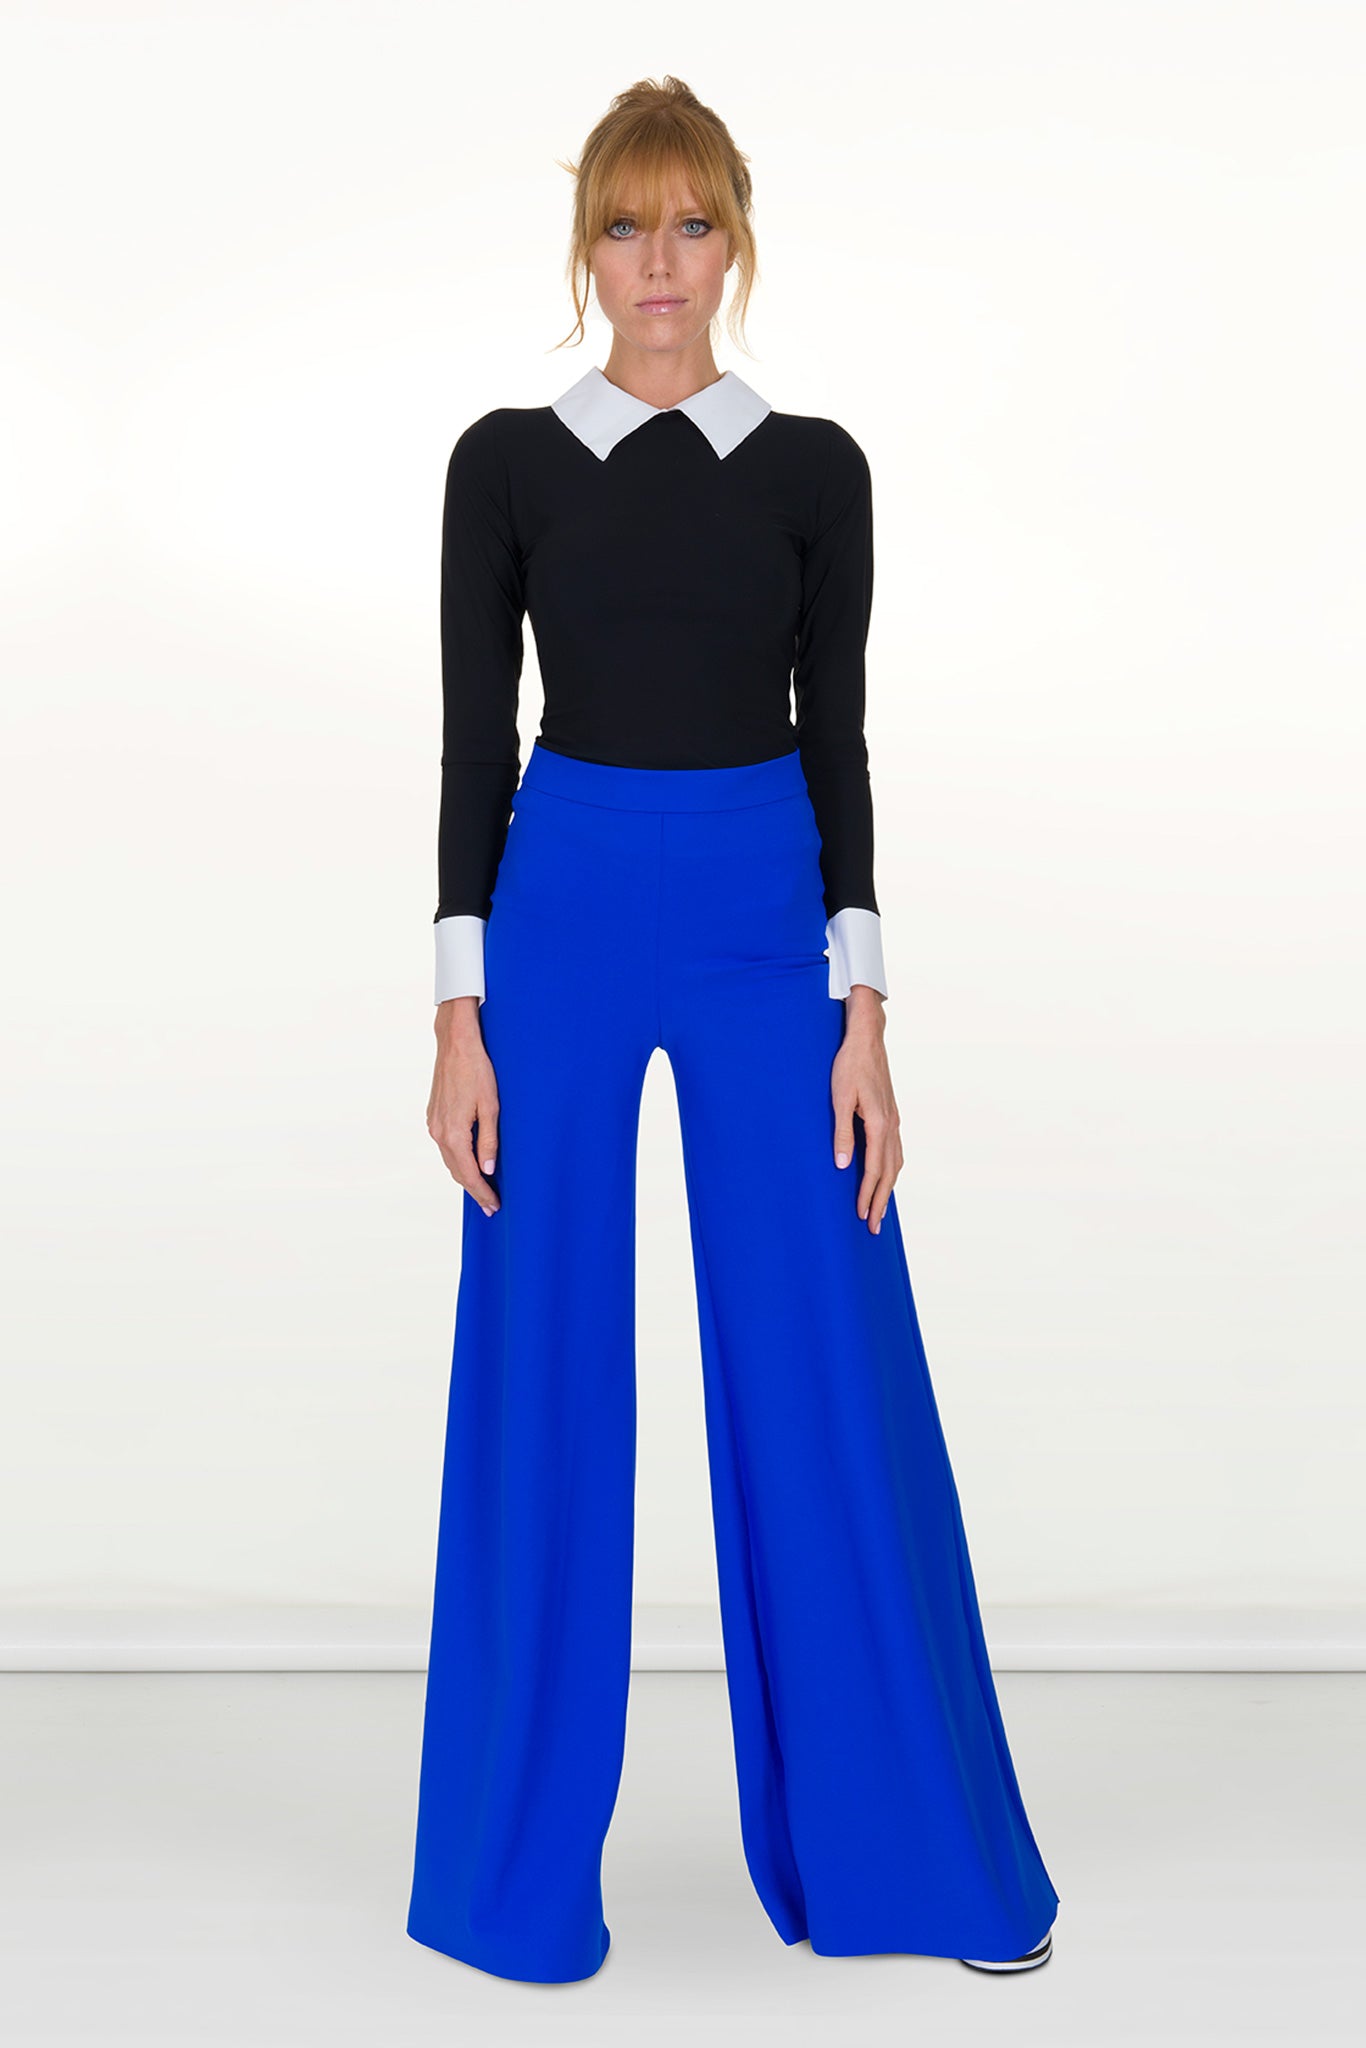 Ladies Royal Blue Trousers Suits in Airport Residential Area - Clothing, Dn  Arena